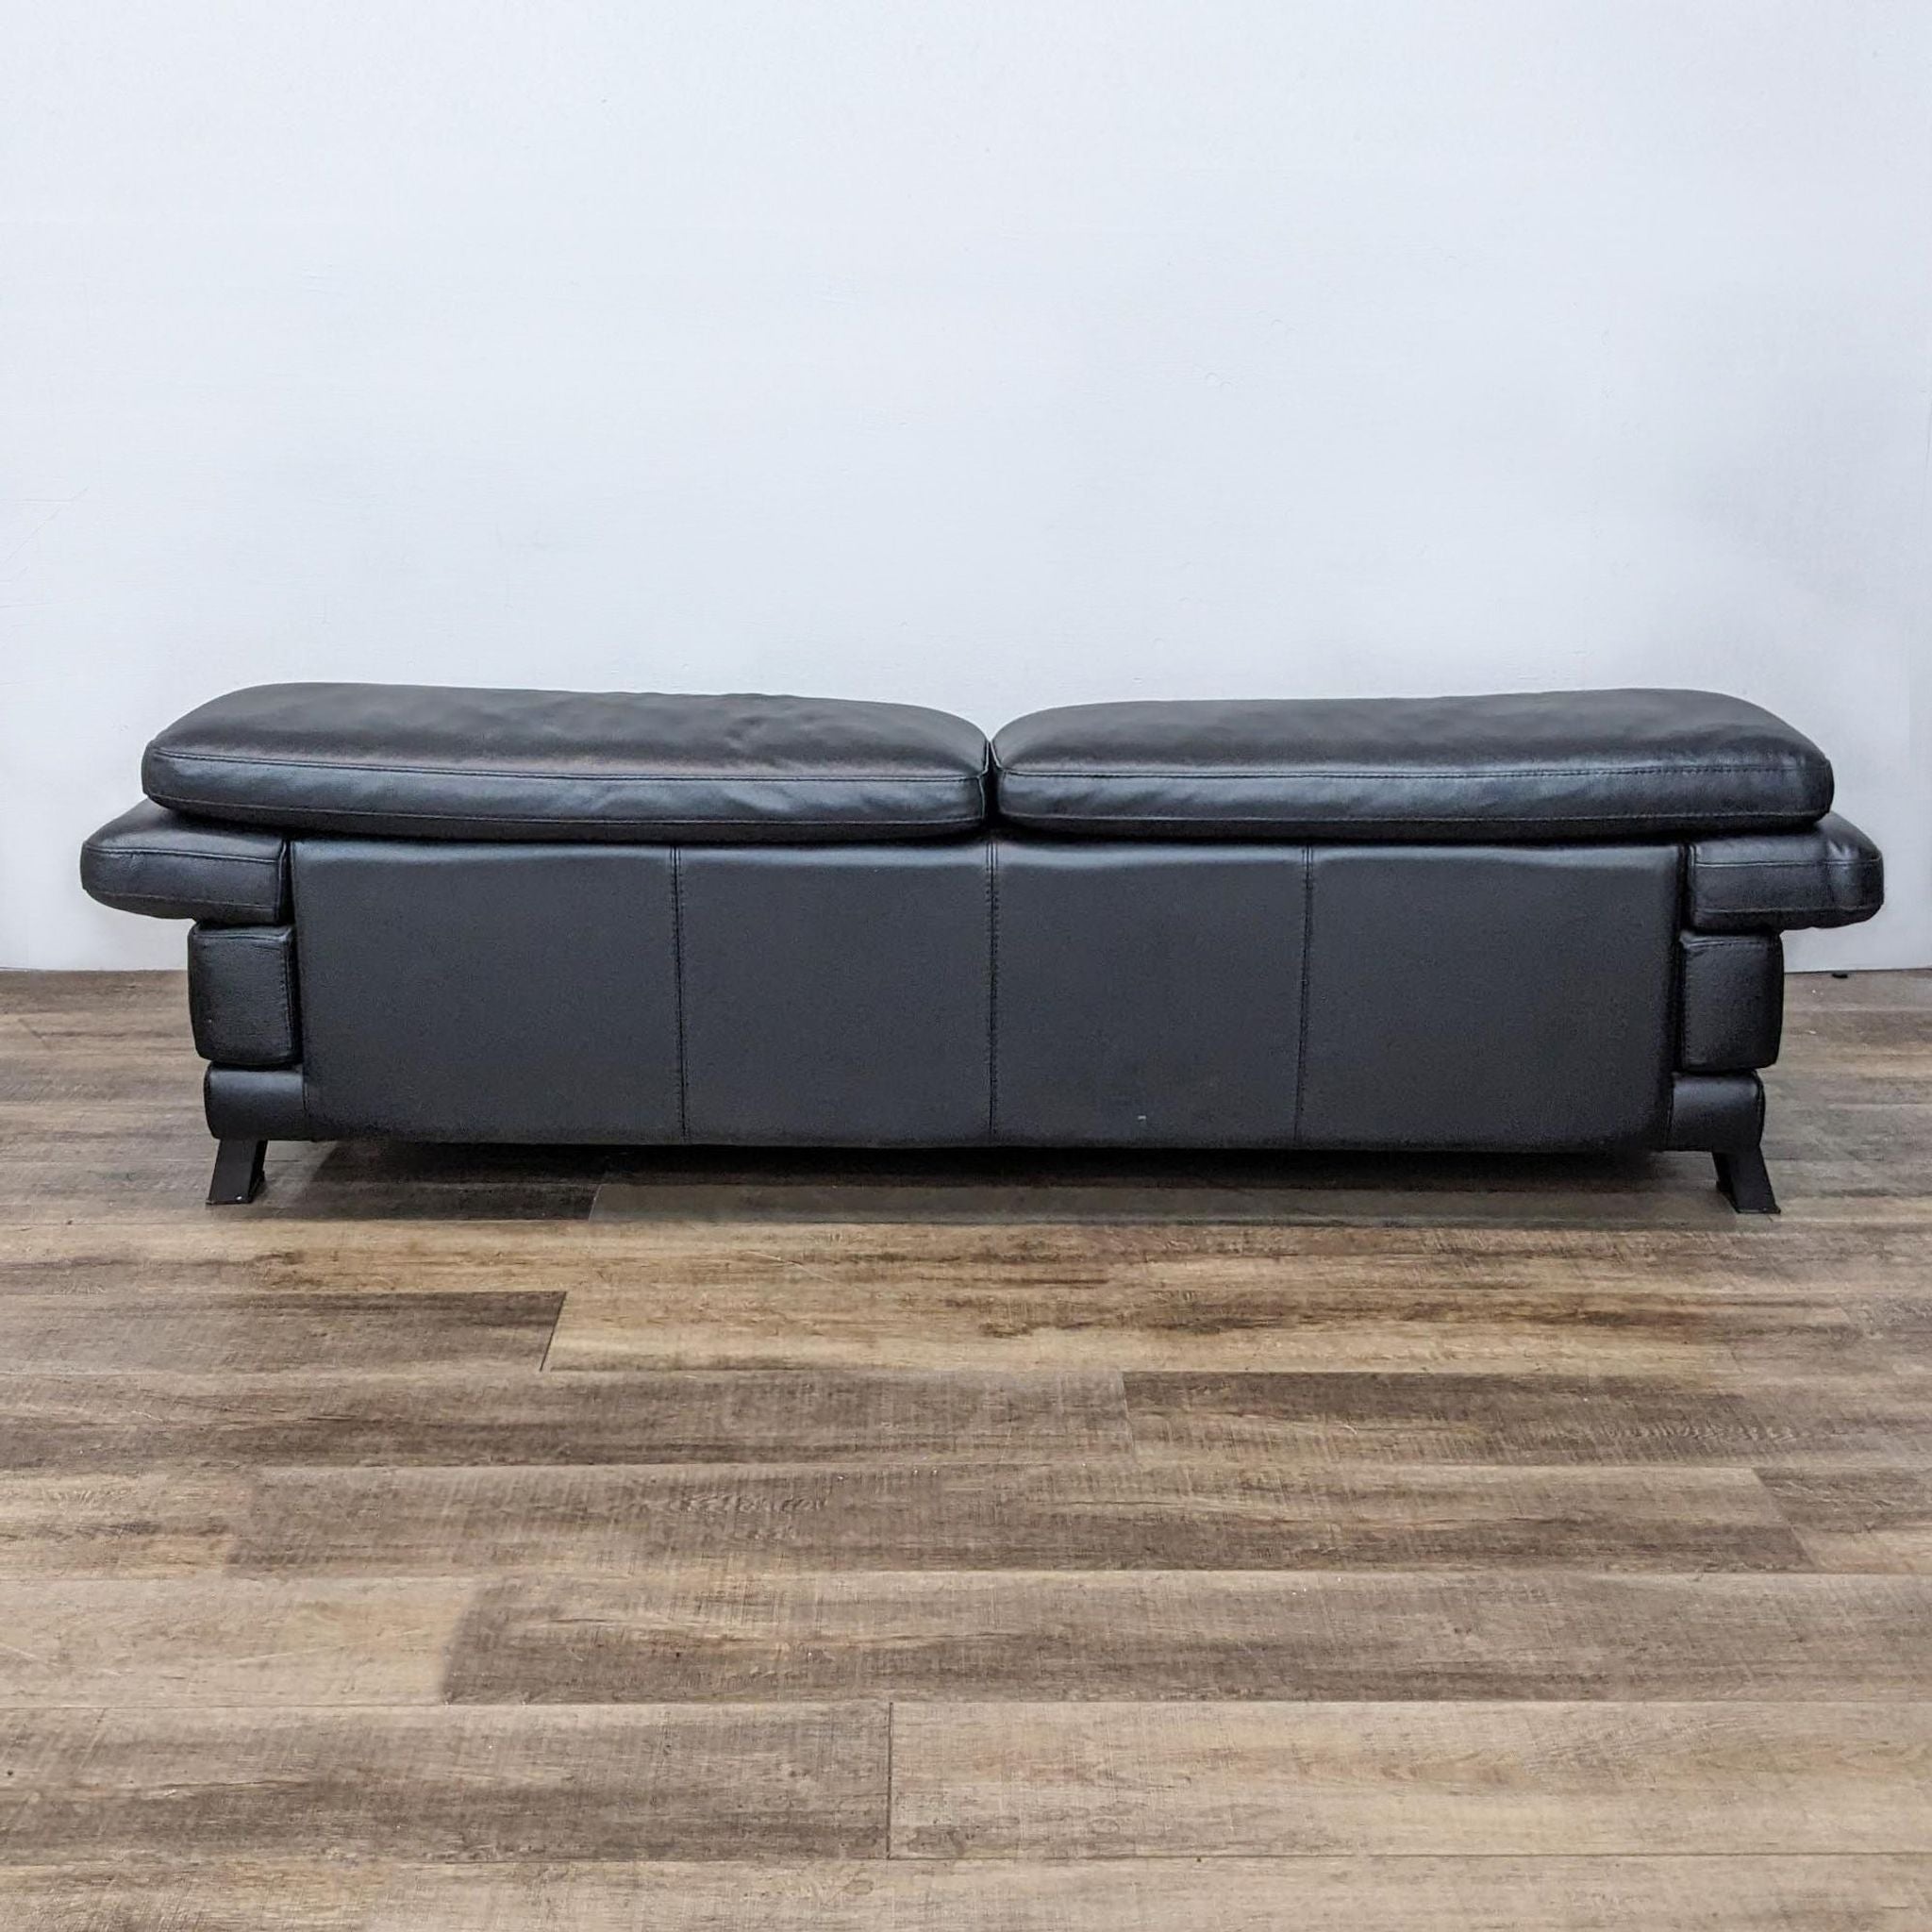 Rear view of Roche Bobois black leather loveseat, highlighting the low profile and metal side frame.